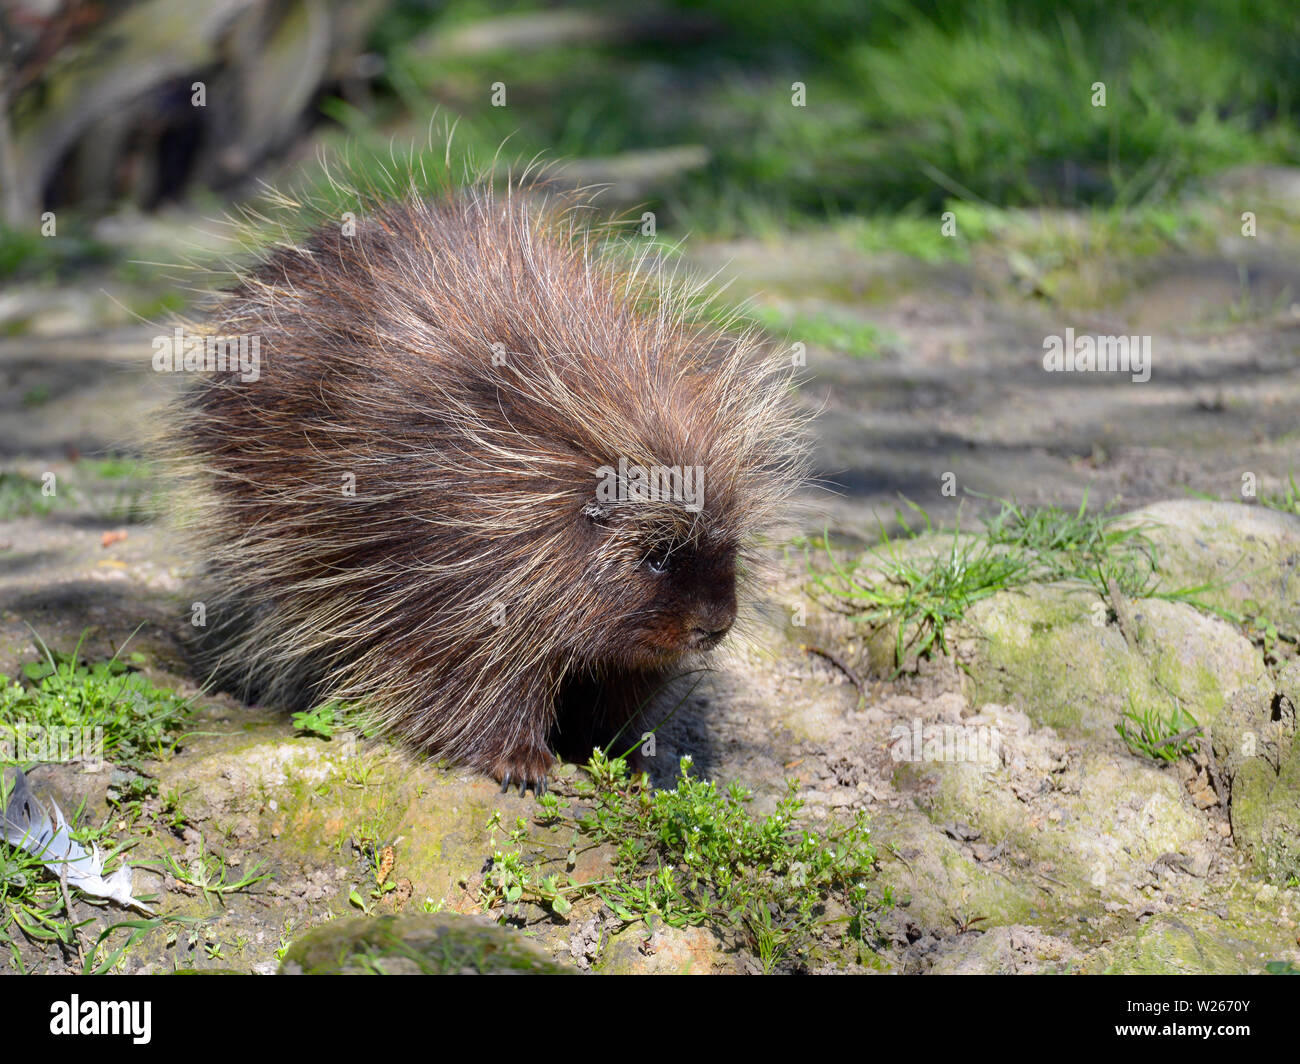 The North American porcupine (Erethizon dorsatum), also known as the Canadian porcupine or common porcupine, walking on ground Stock Photo